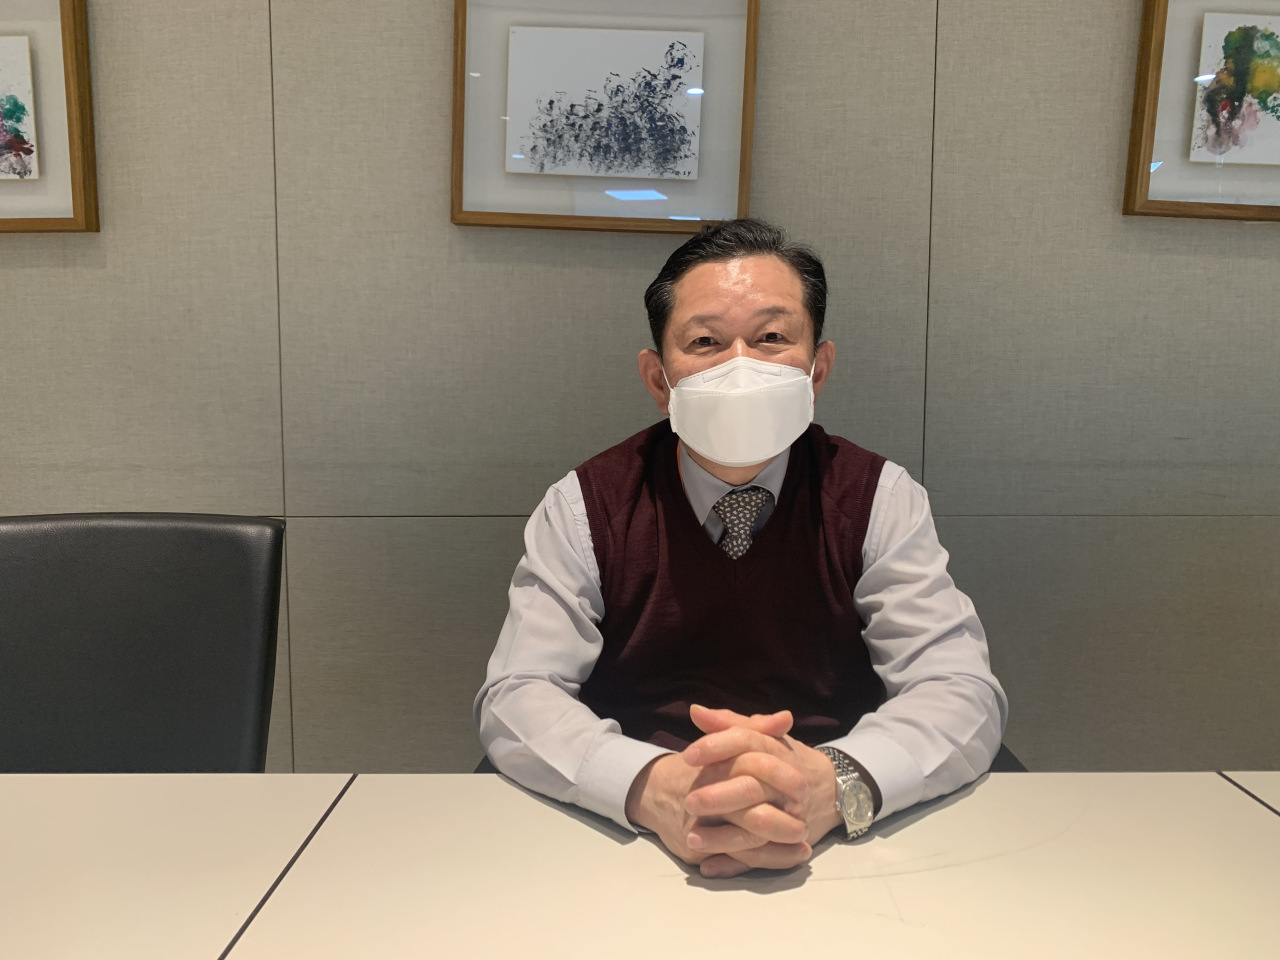 Dr. Jun Byung-yool, who led the Korea Centers for Disease Control and Prevention from 2011-2013, speaks with The Korea Herald at his office in Pangyo, Gyeonggi Province. (Kim Arin/The Korea Herald)